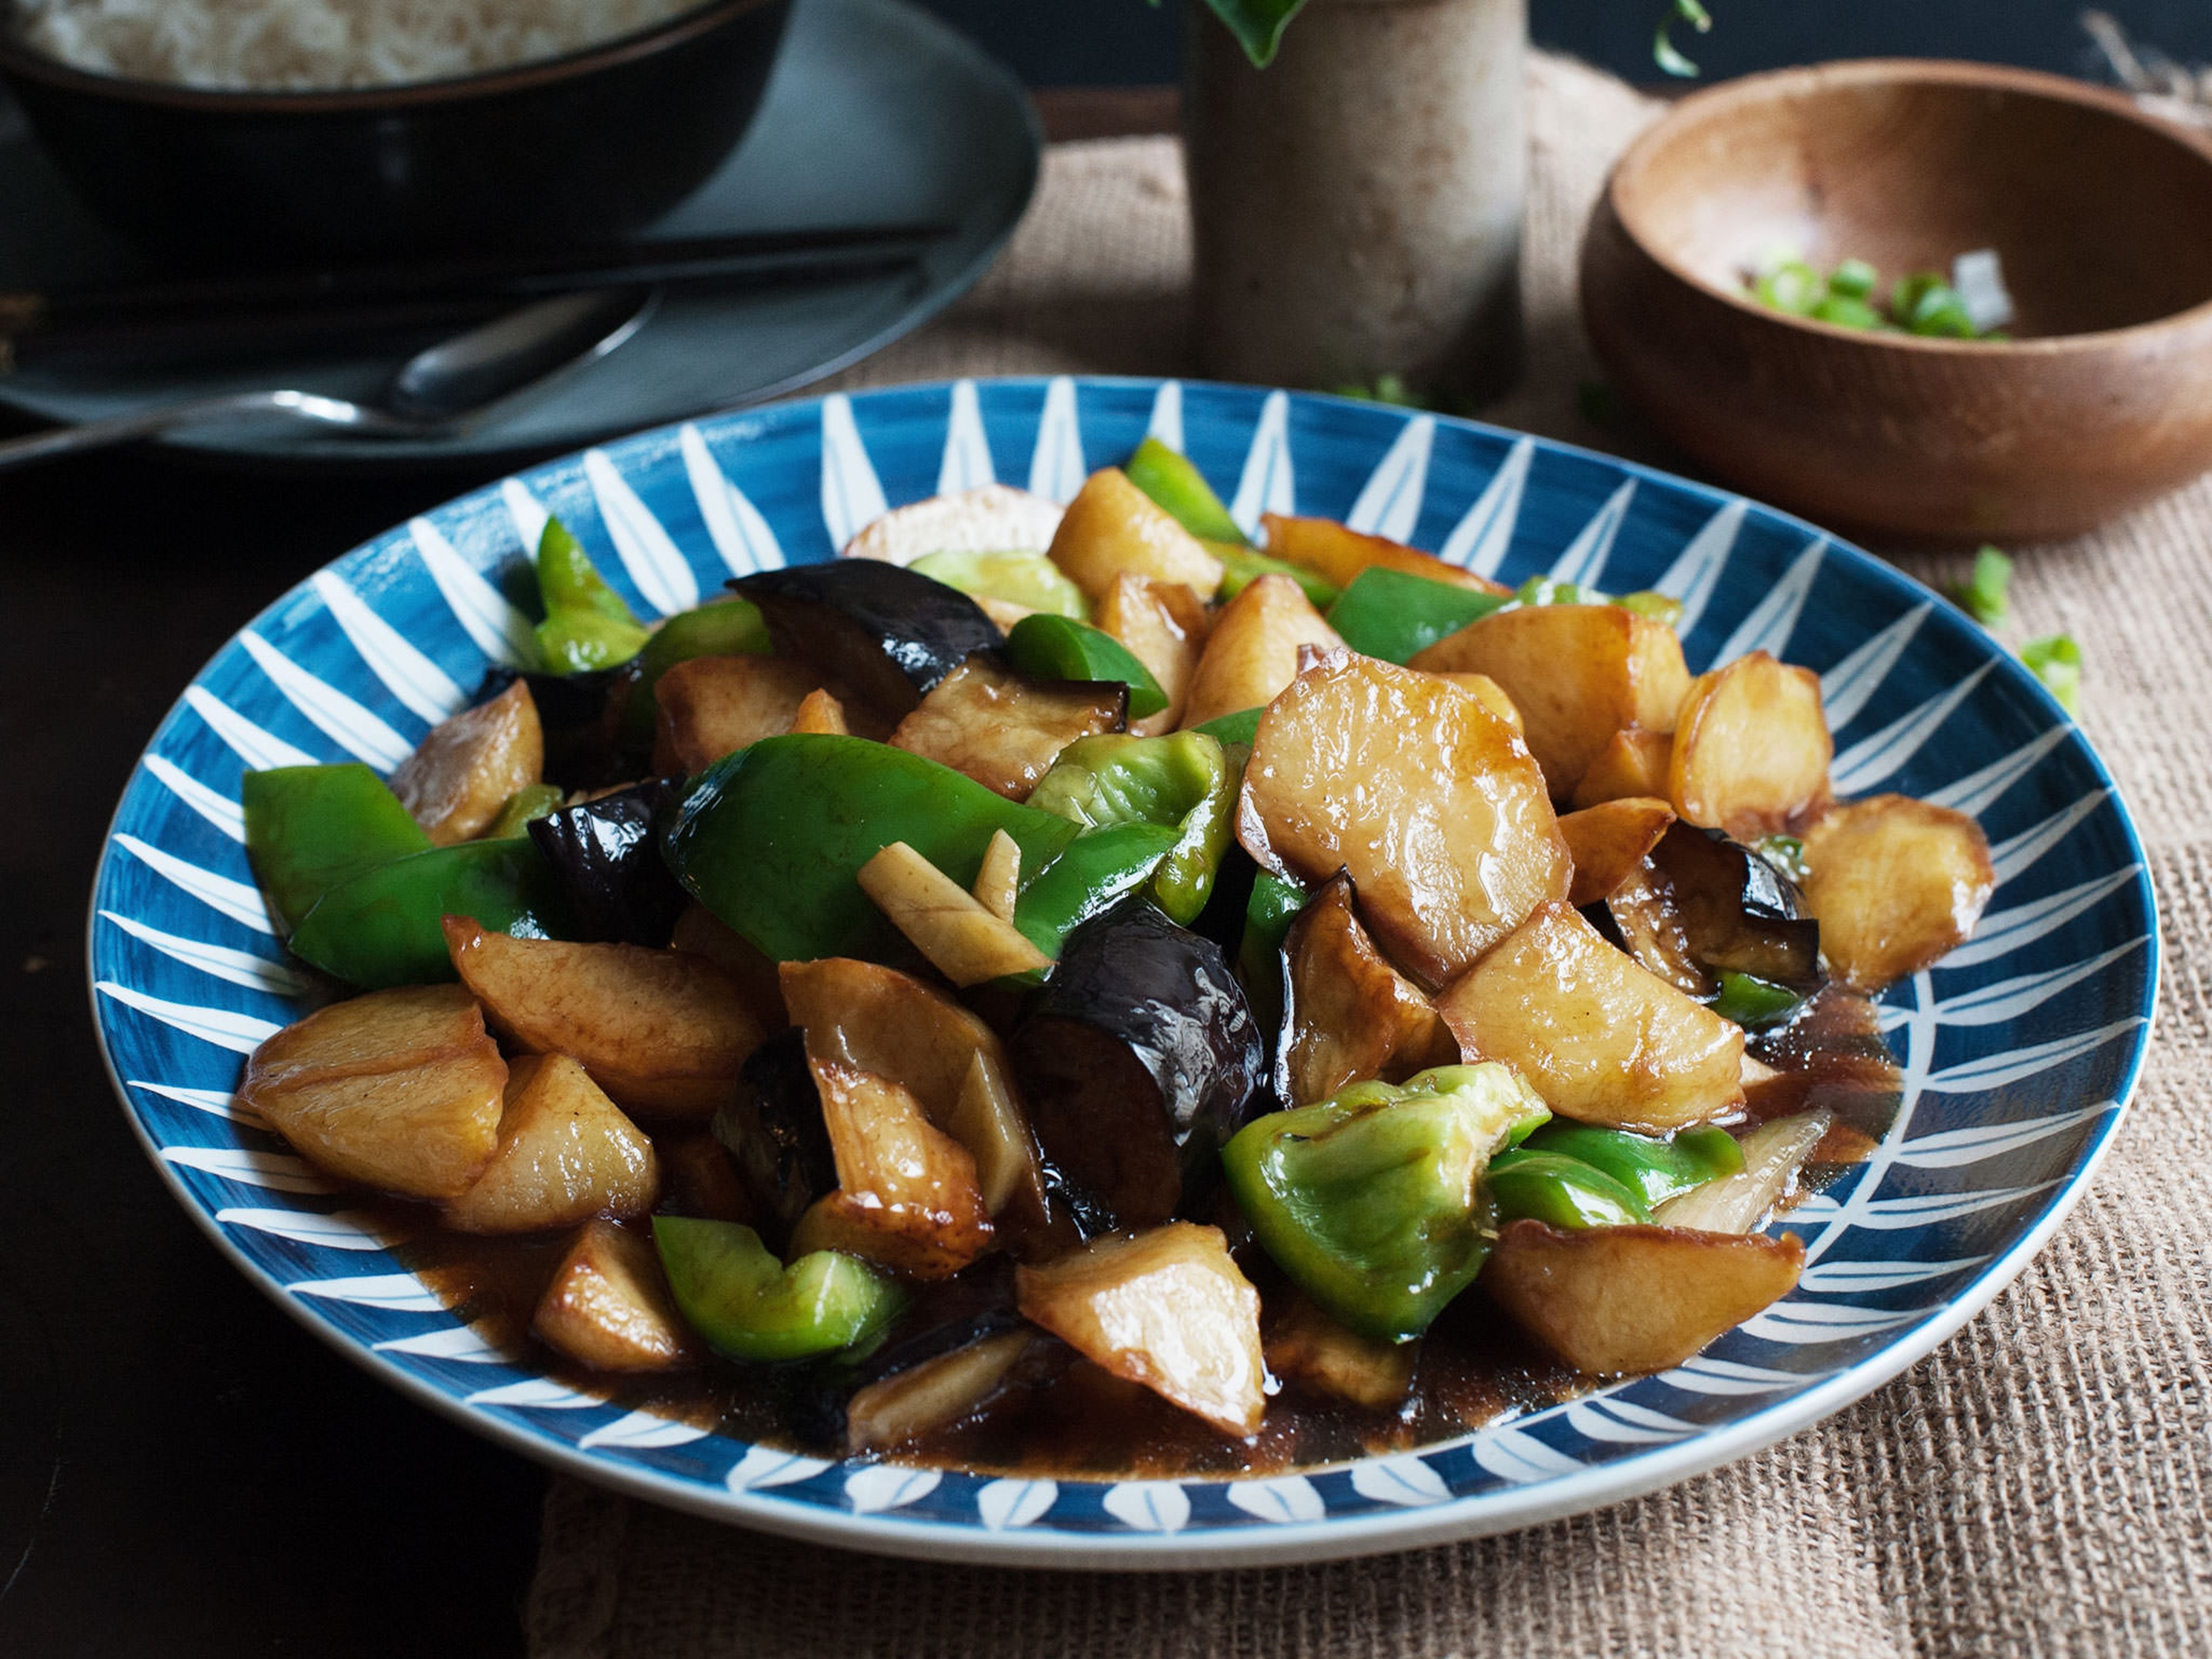 Stir-fried eggplant, potatoes, and peppers